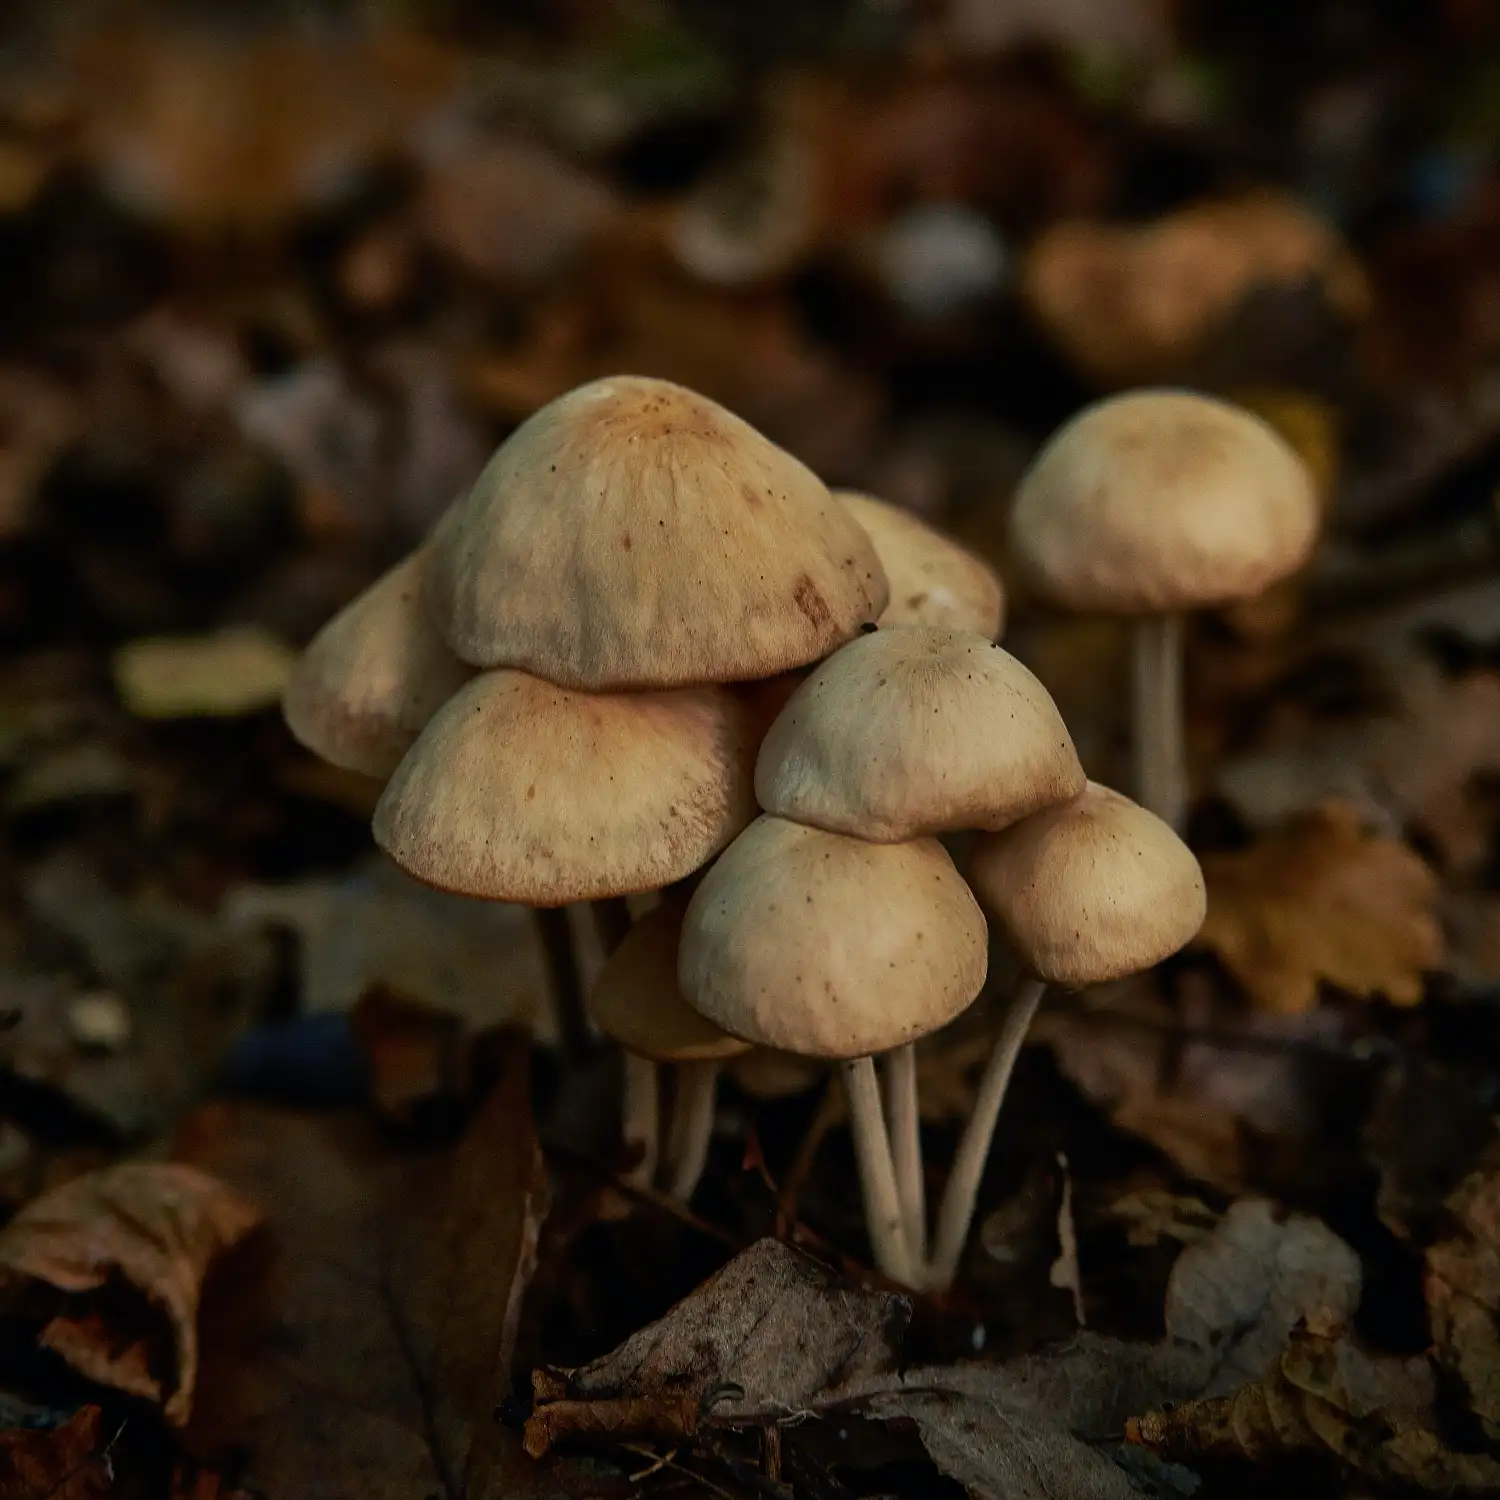 Some wonderful mushrooms surrounded by autumn leaves.